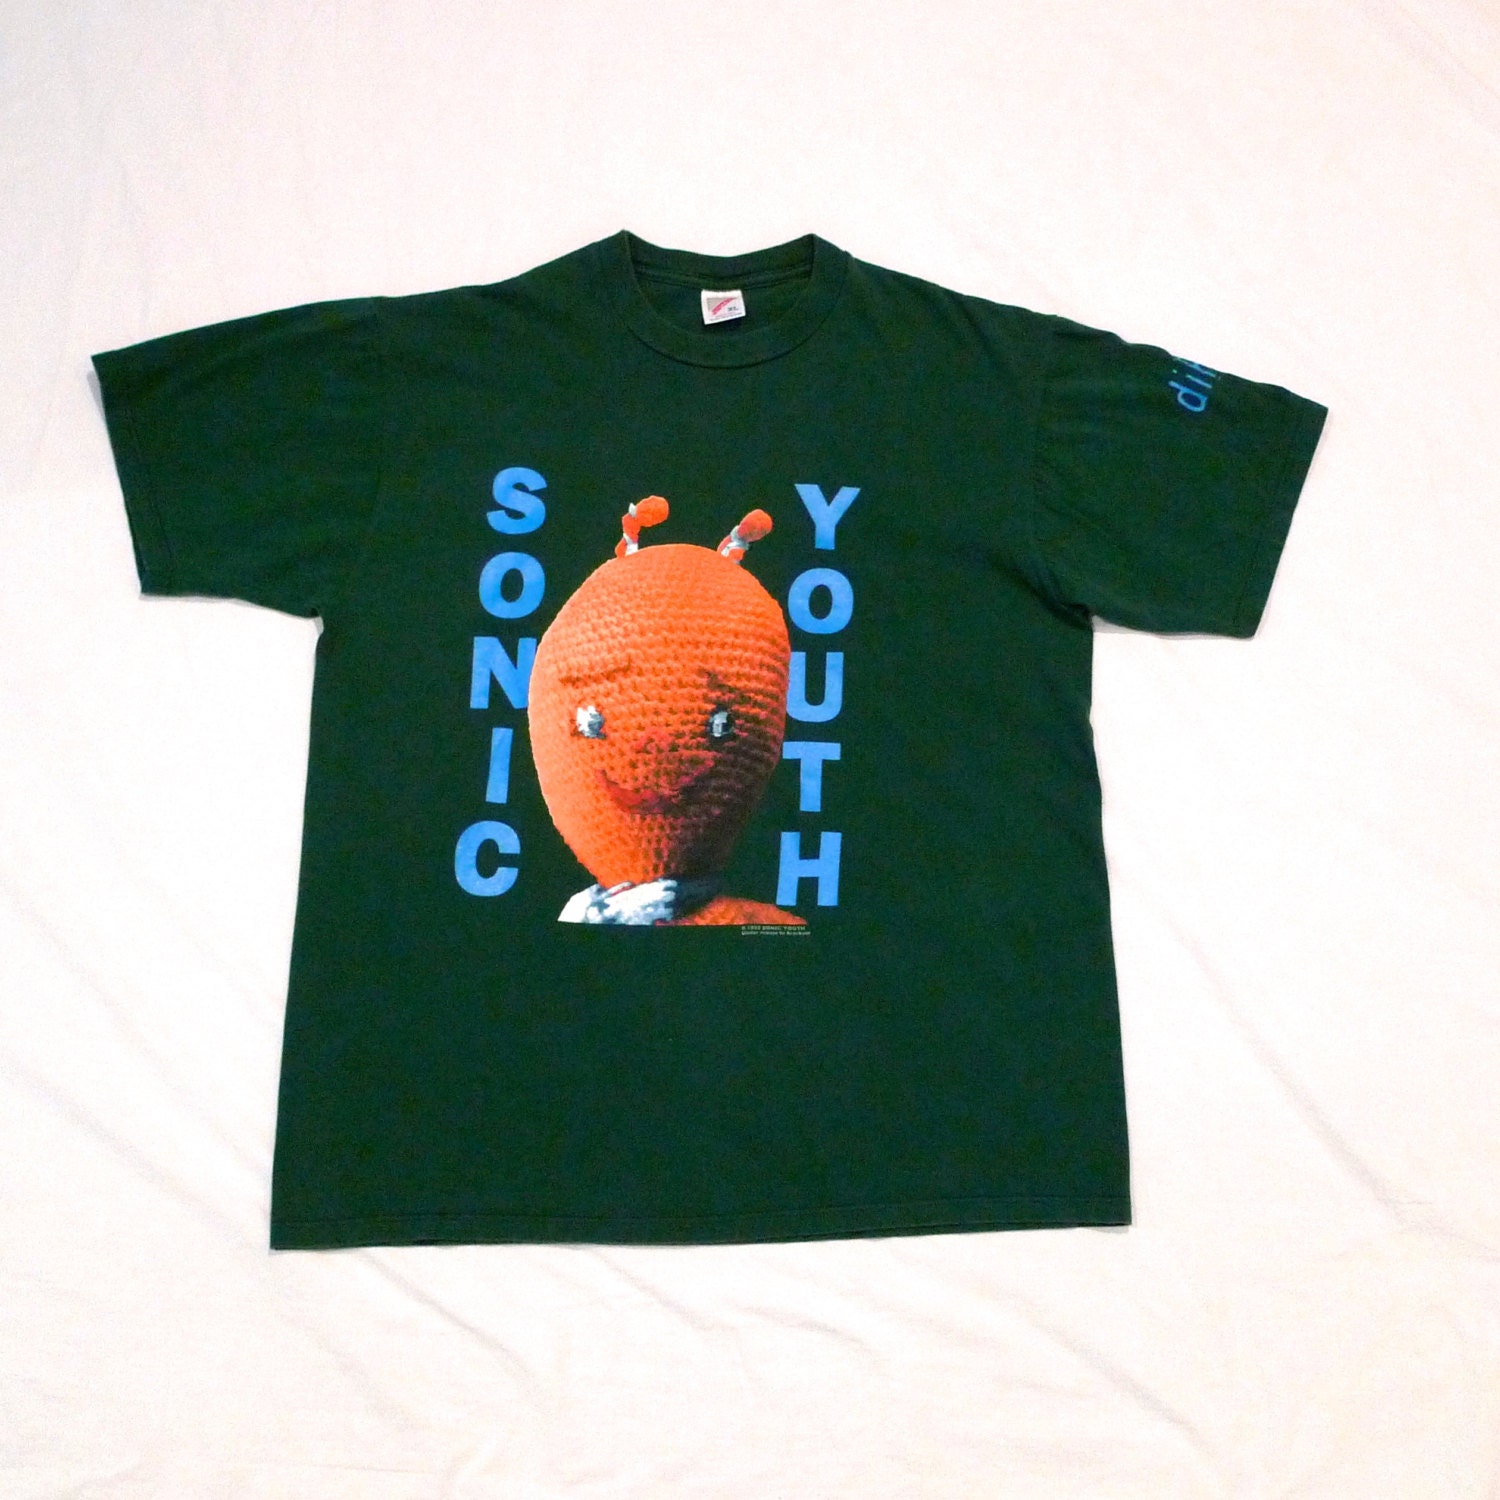 Sonic Youth T-shirt Vintage XL Extra Large Tee Mike Kelley